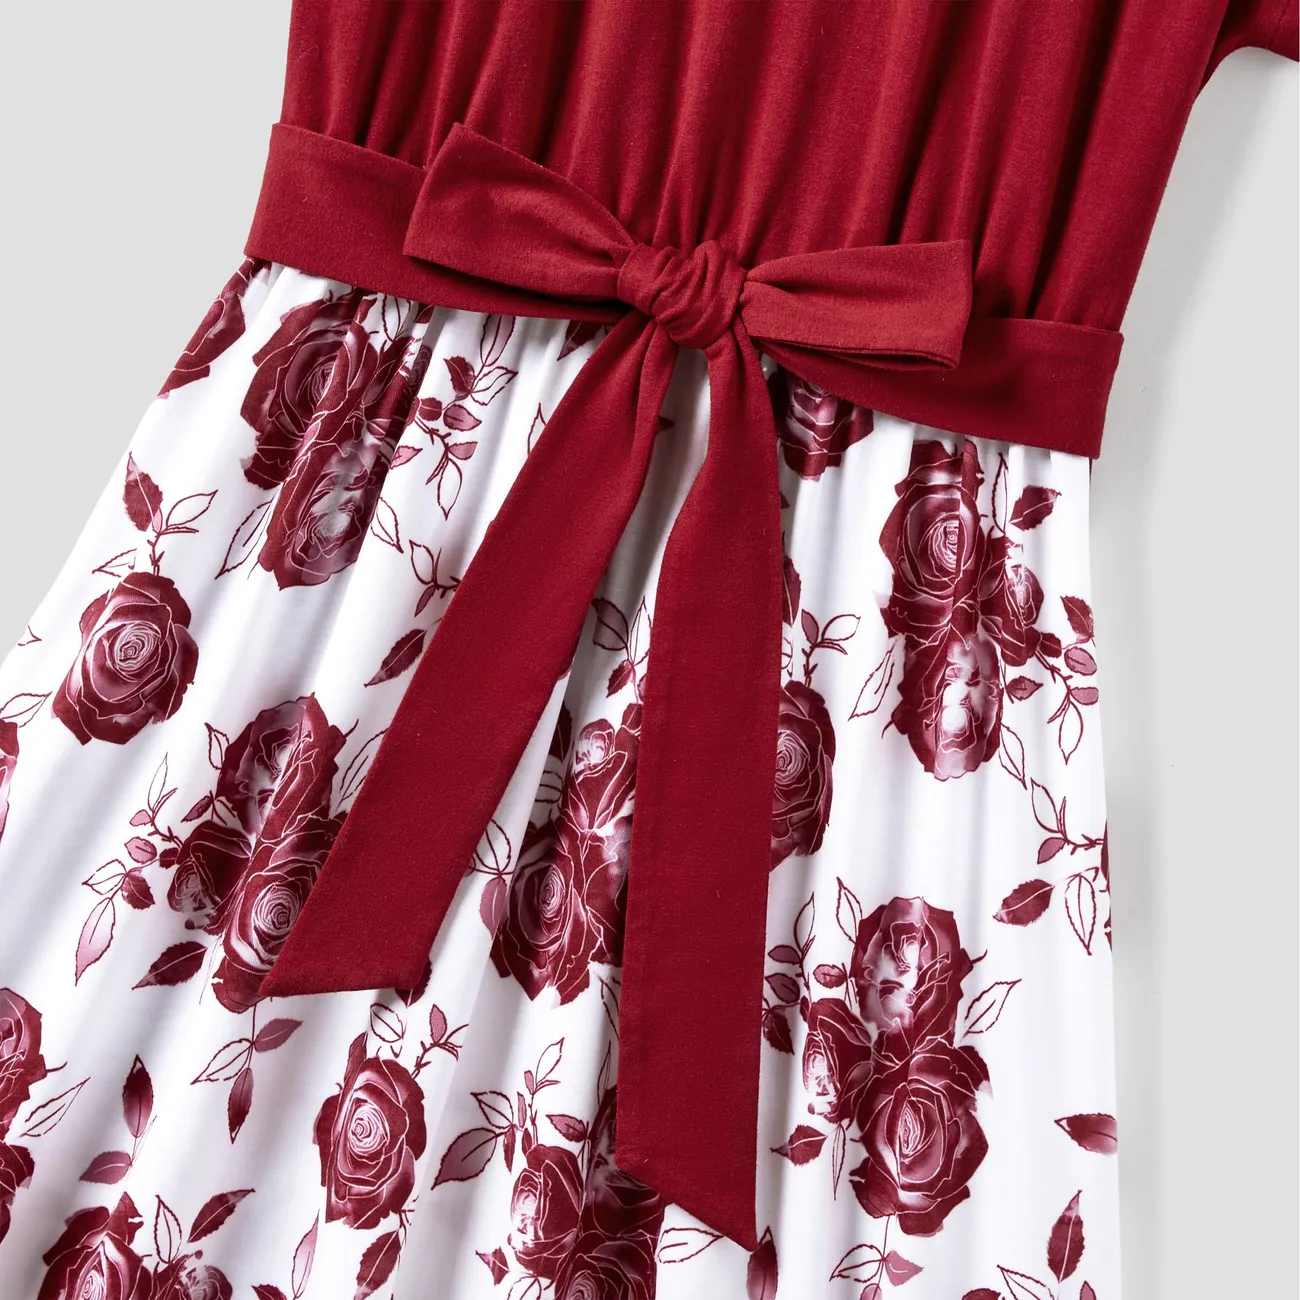 Family Matching Color Block Tee and Button Belted Spliced A-Line Dress Sets Burgundy big image 1